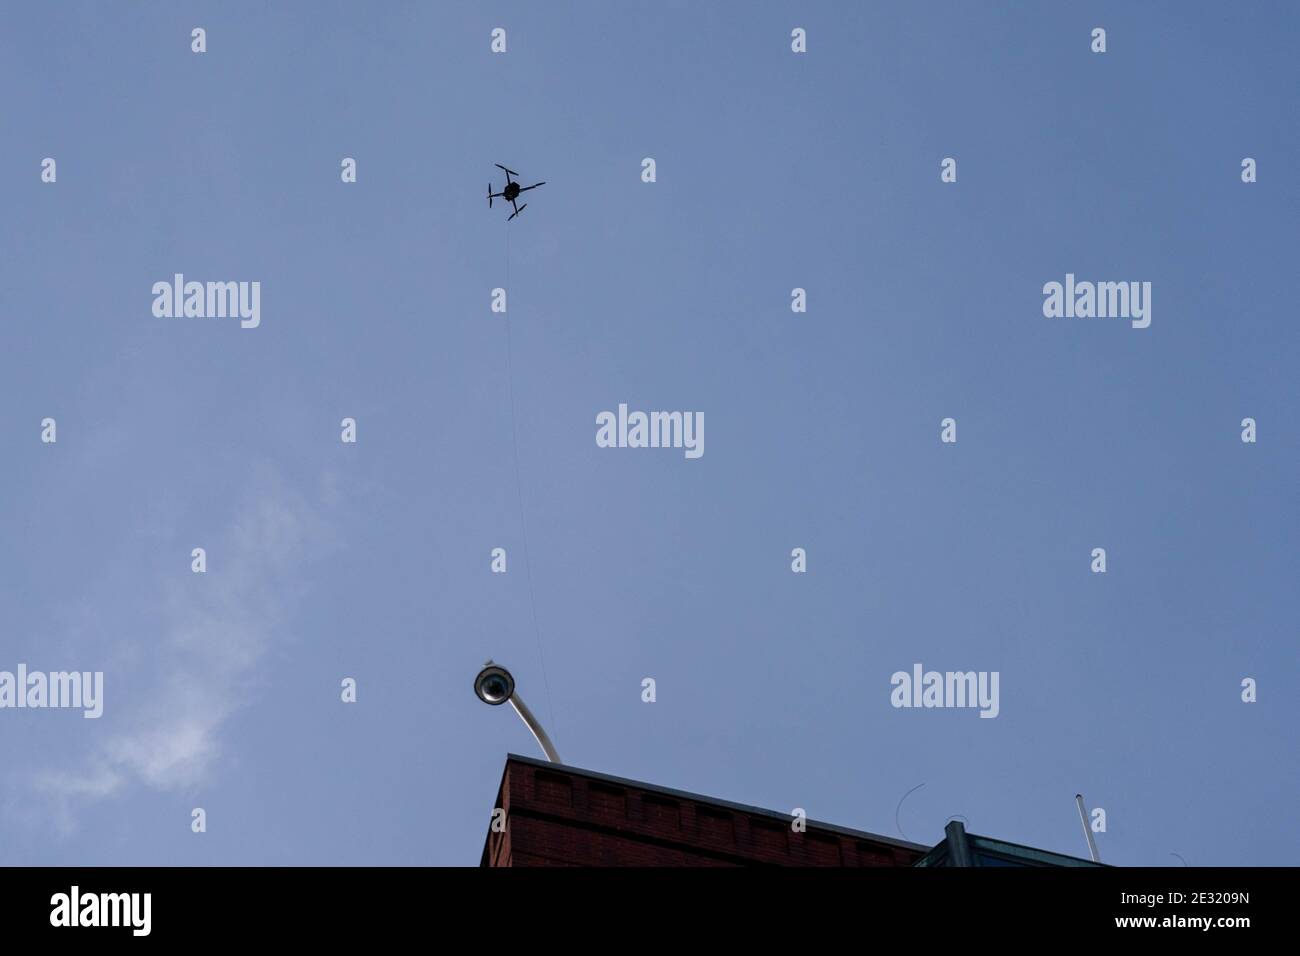 A drone flies tethered to a building ahead of the upcoming inauguration for President Joe Biden January 16, 2021 in Washington DC. Security is even tighter given there recent events on Jan 6, when pro-Trump MAGA mobs breached the security perimeter and penetrated the U.S. Capitol Photo by Ken Cedeno/Pool/ABACAPRESS.COM Stock Photo